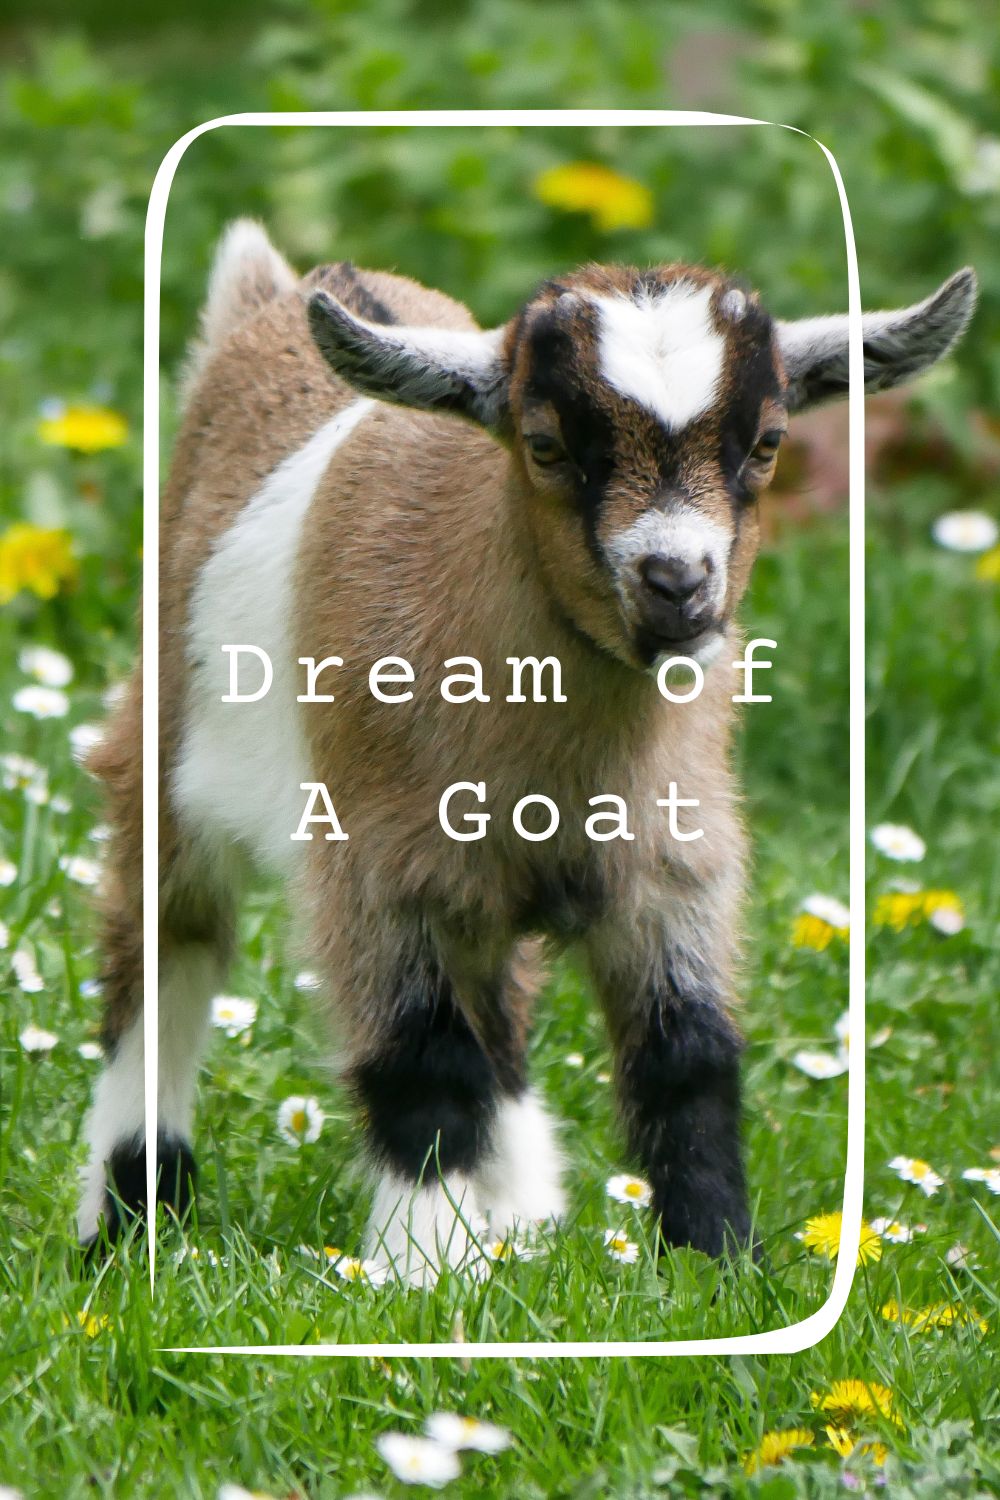 6 Dream of A Goat Meanings4